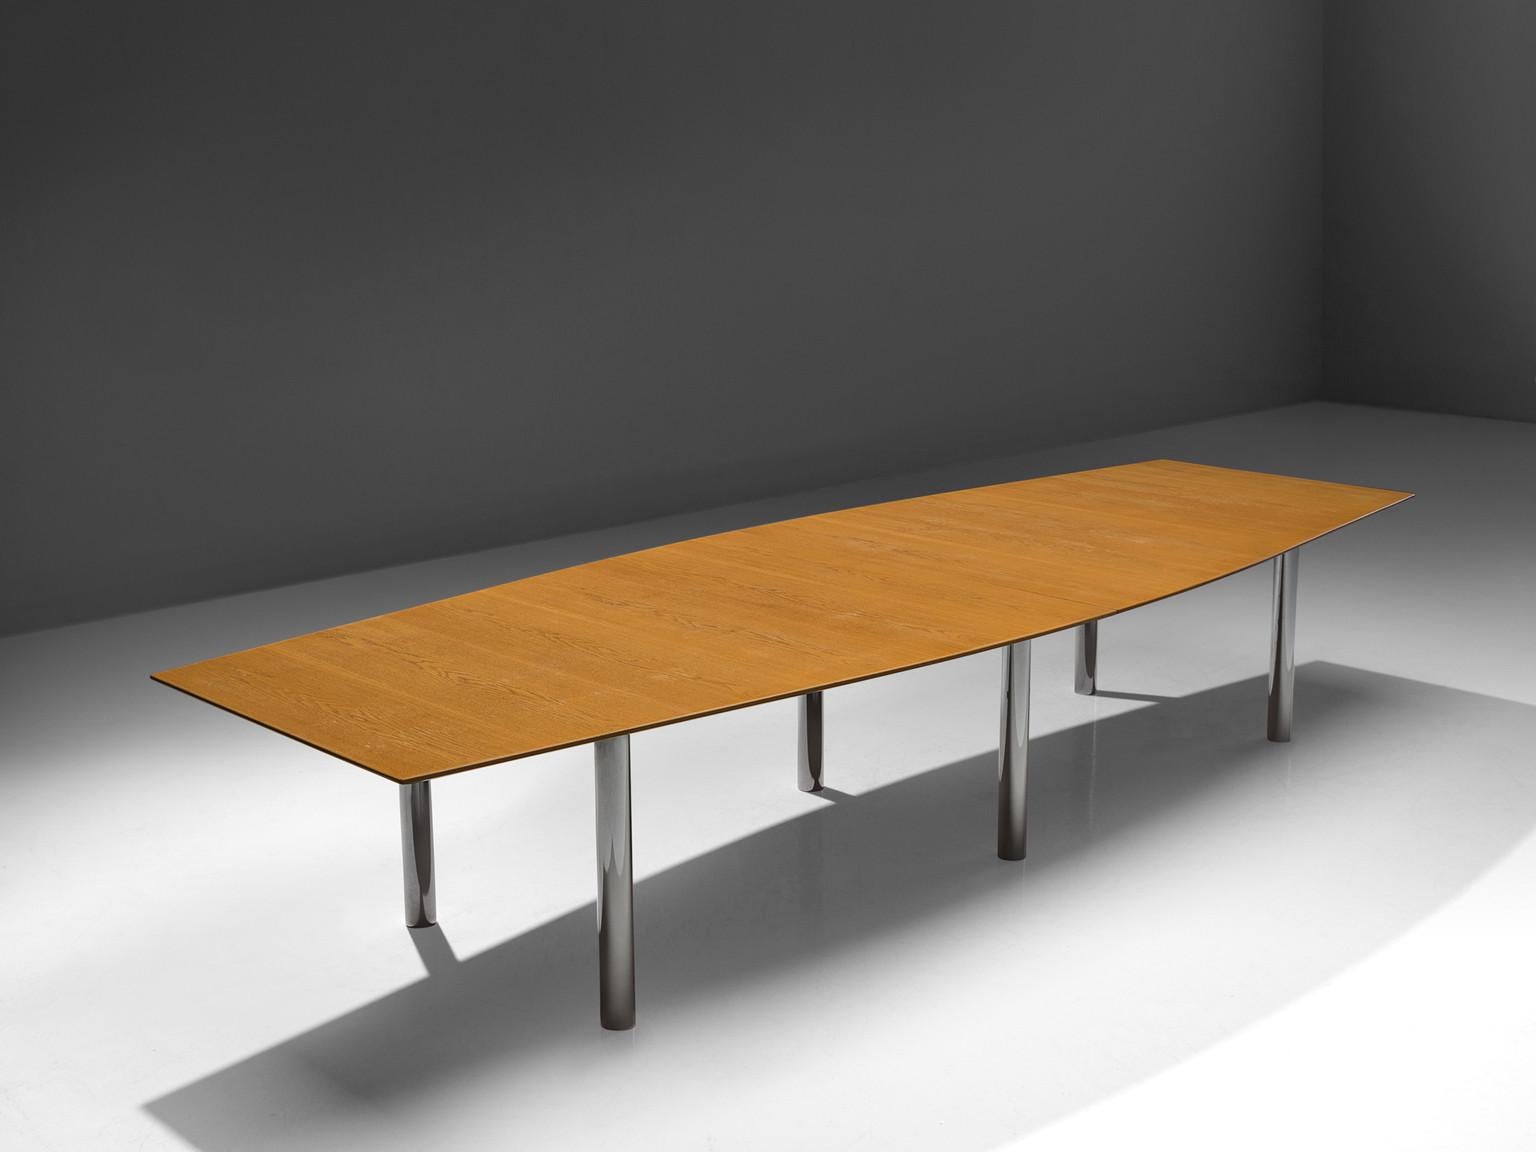 Florence Knoll for Florence Knoll International, large dining table, walnut, metal, United States, 1963.

Large dining or conference table with boat shaped top in walnut. The table has six cylindrical metal legs. The top of this table shows the